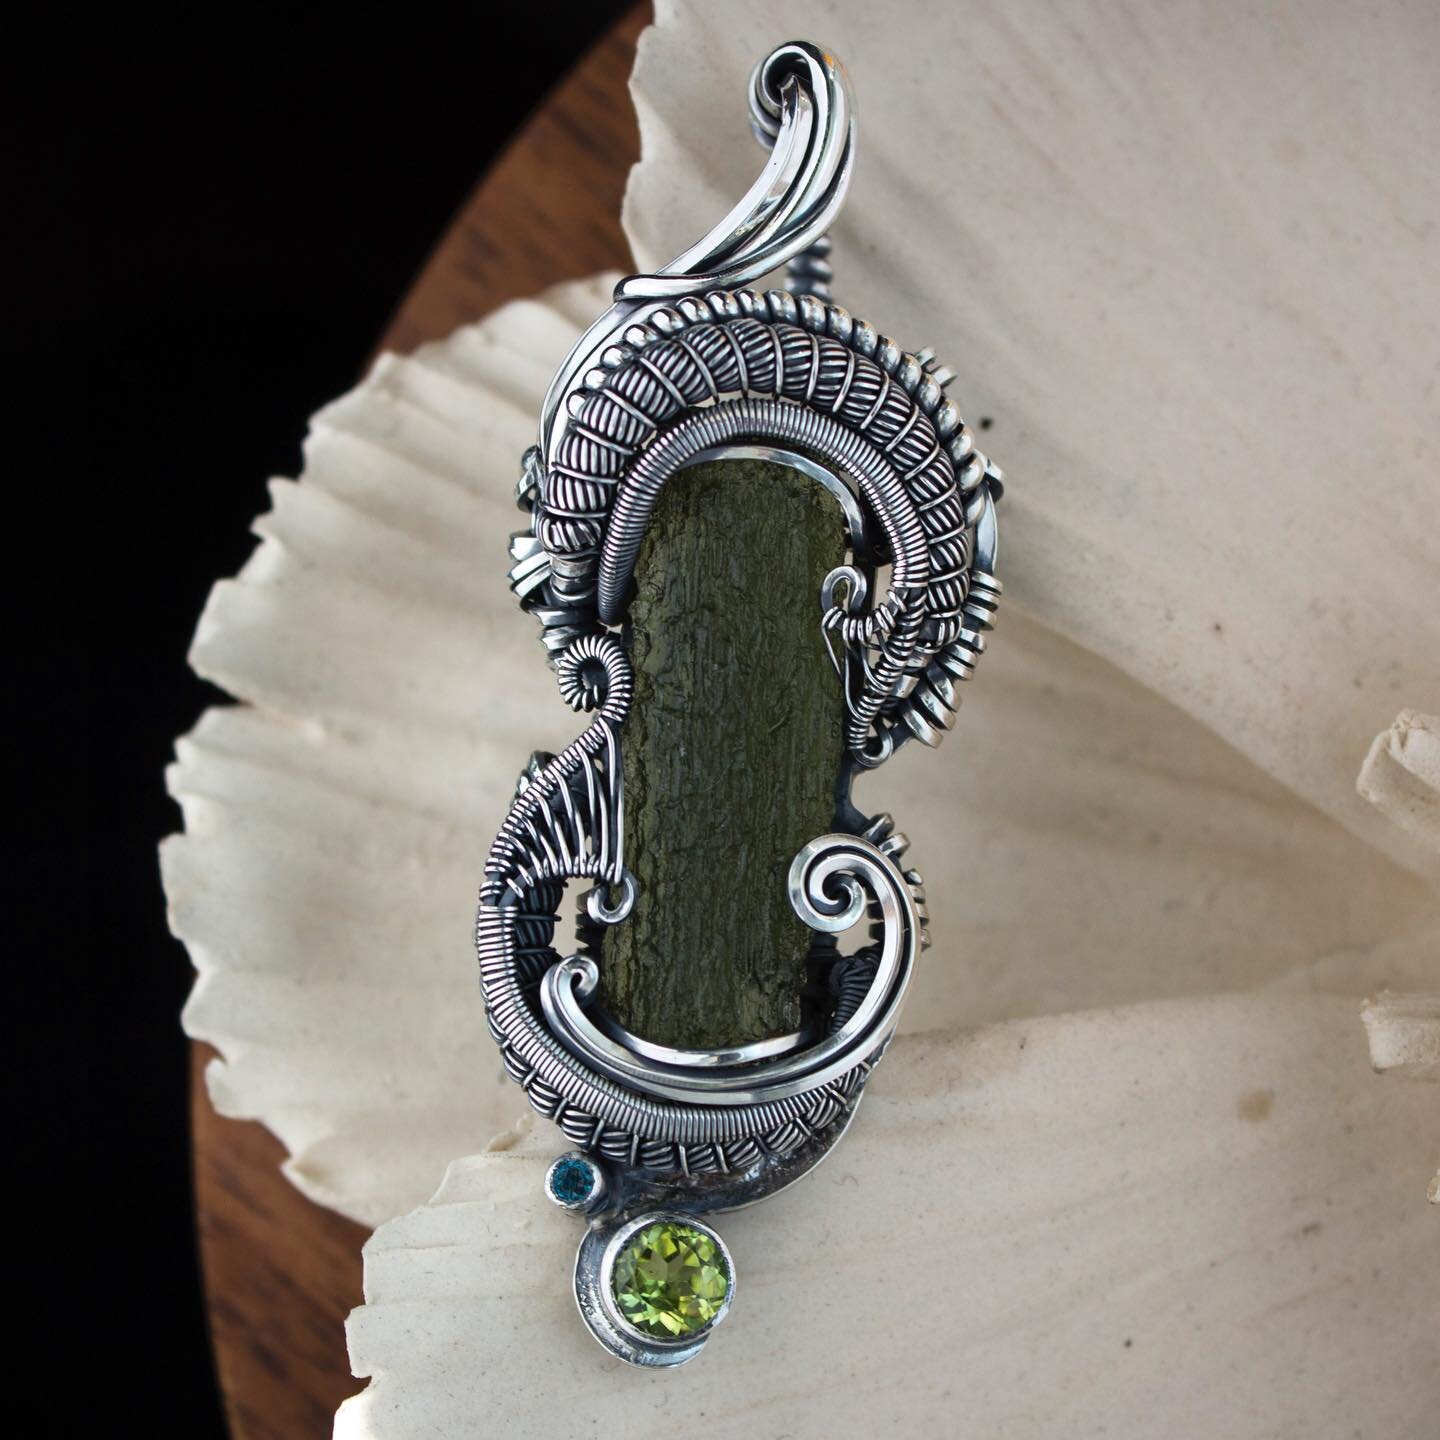 Here&rsquo;s a better look at this magical Moldavite piece! I decided to call this one &ldquo;Vernal Enchantment&rdquo; because the Moldavite is so wand-like 🪄✨

Features a high-quality 2.6g Moldavite stick, a Peridot, and a tiny Blue Apatite. Made 